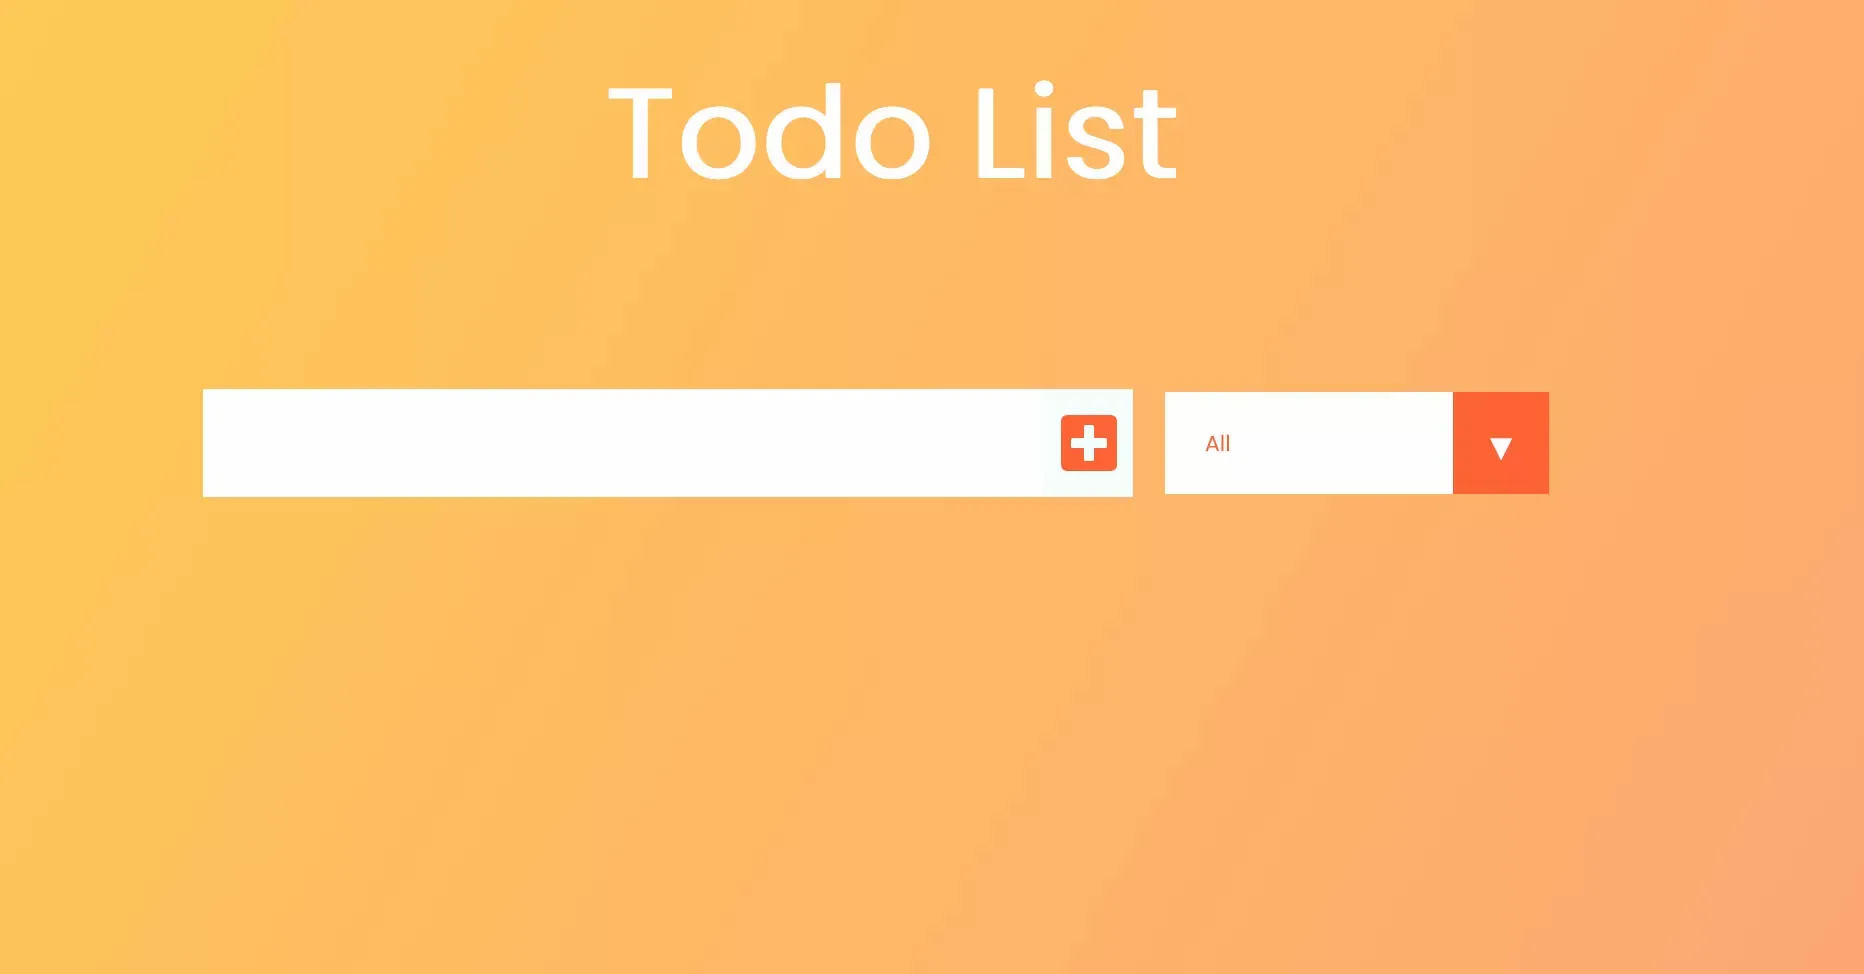 Yet another React Todo List